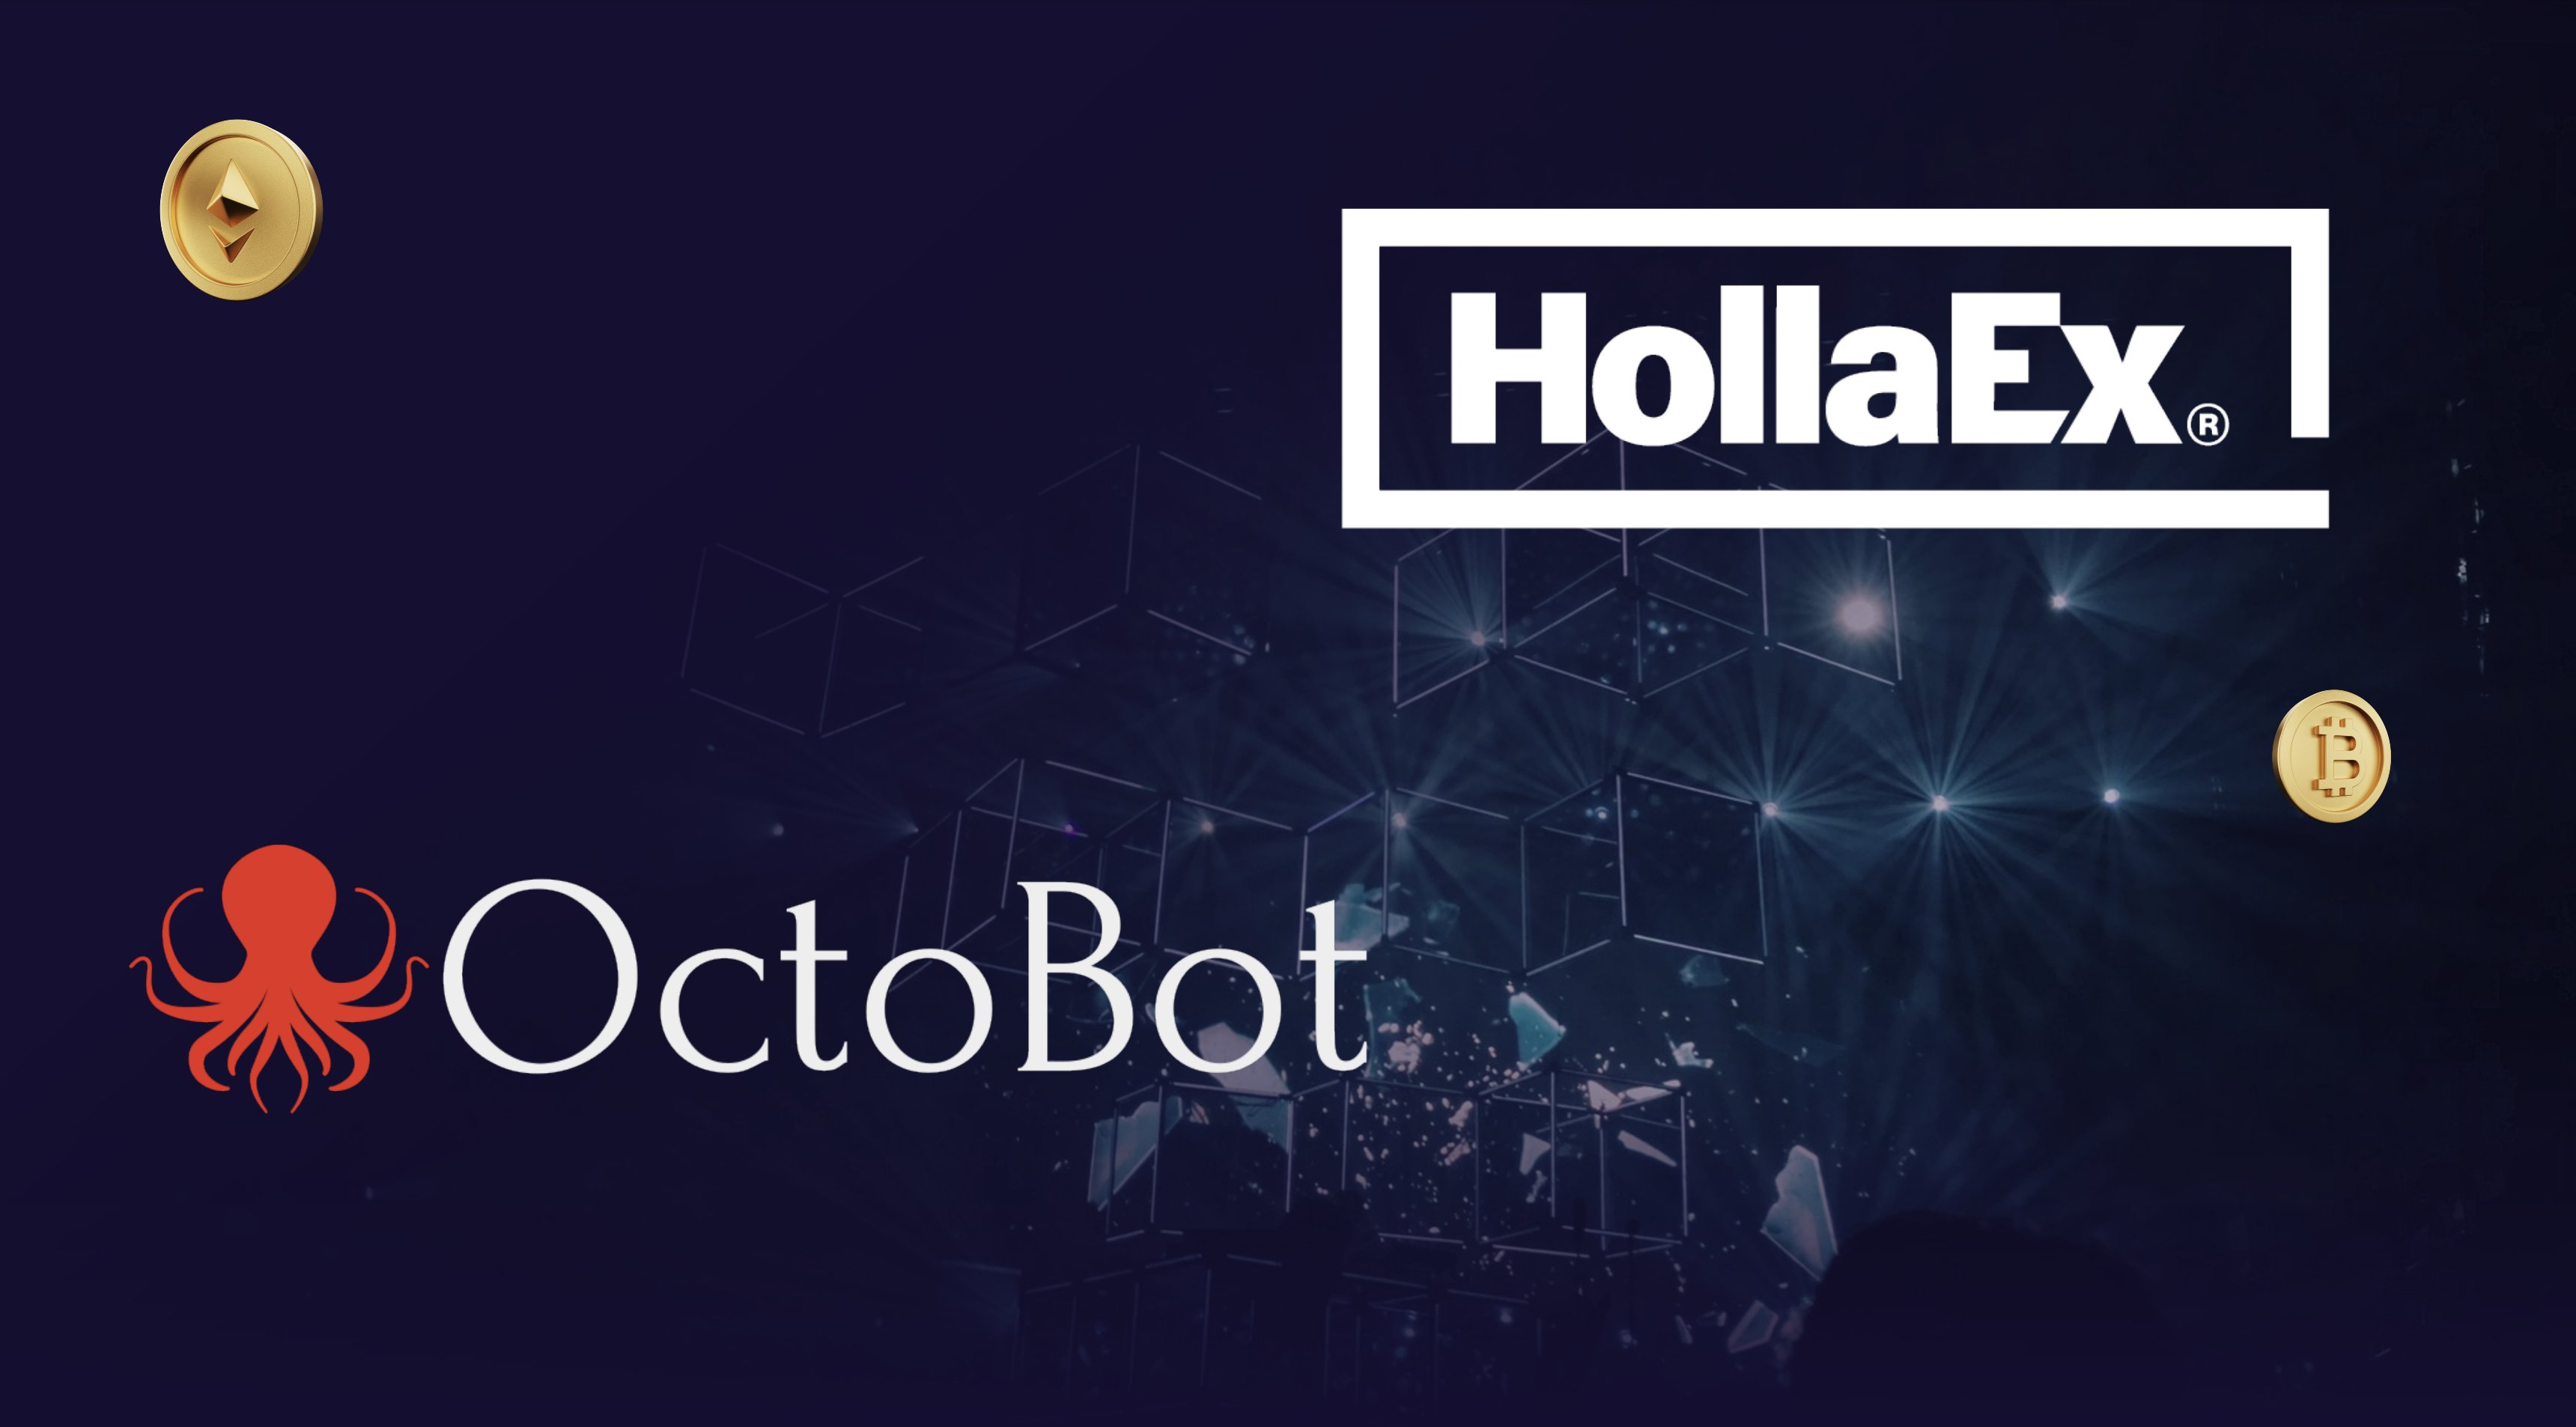 OctoBot is now supporting Hollaex